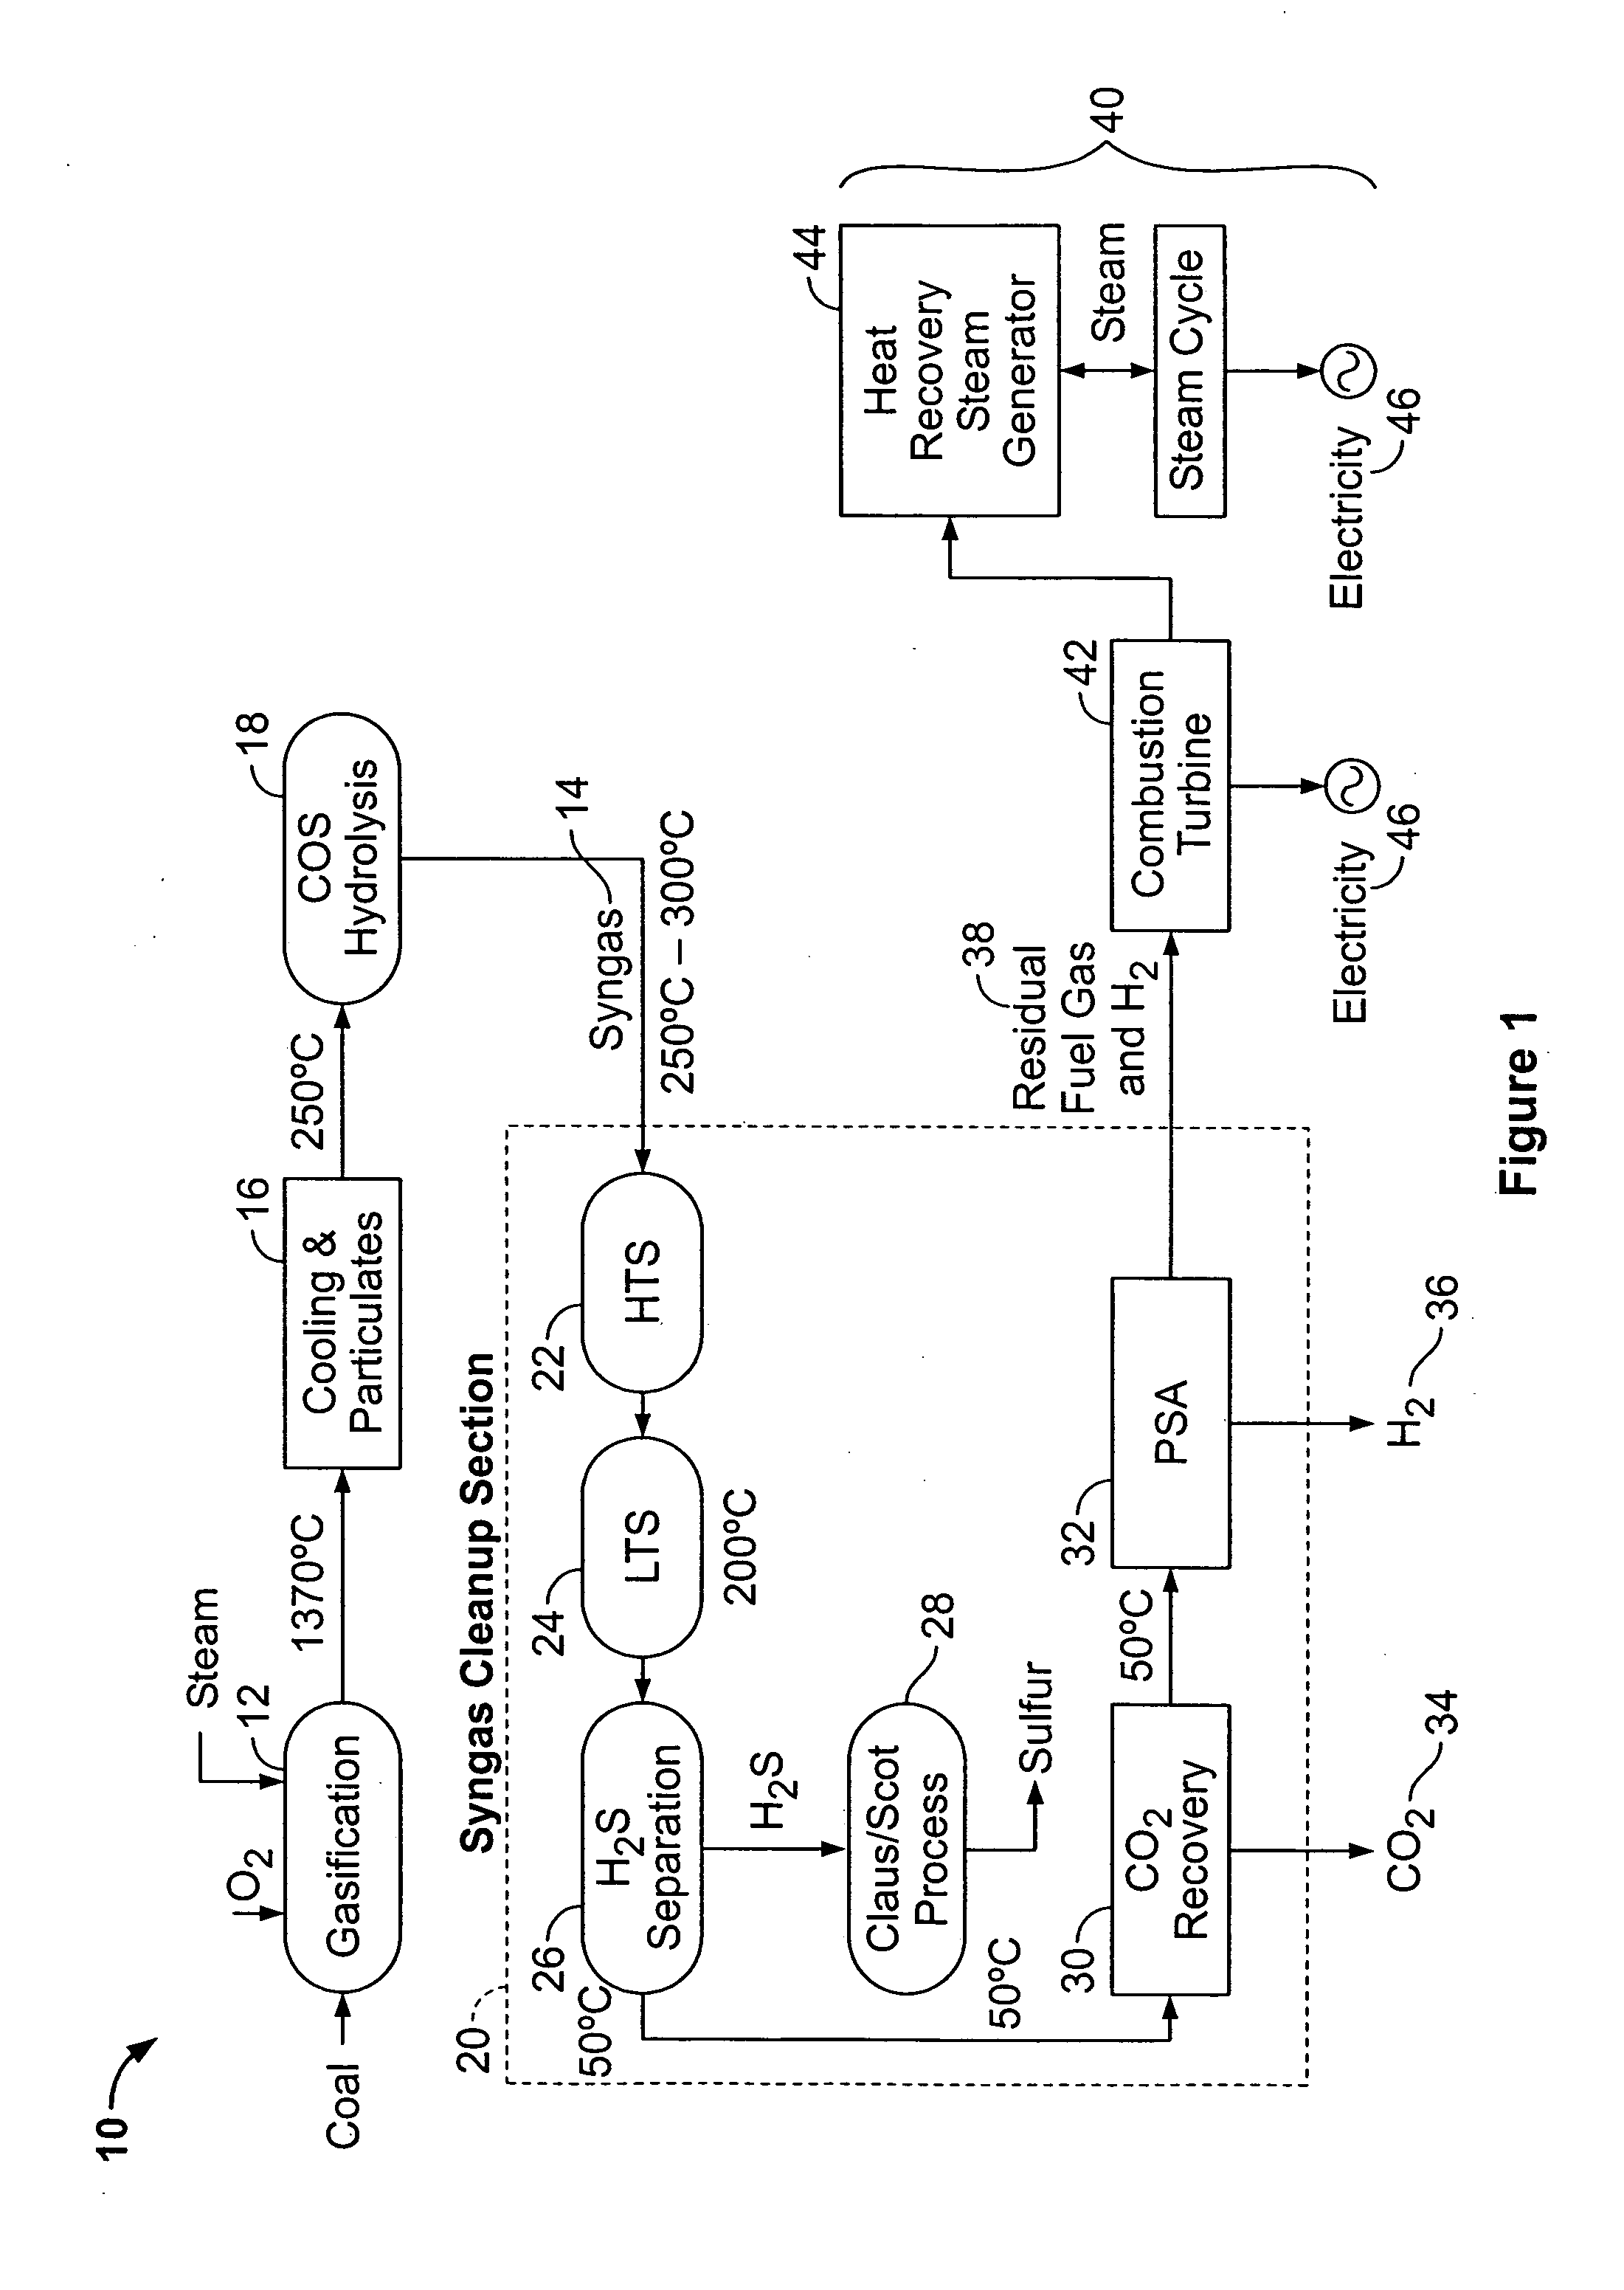 Methods and apparatus for hydrogen gas production